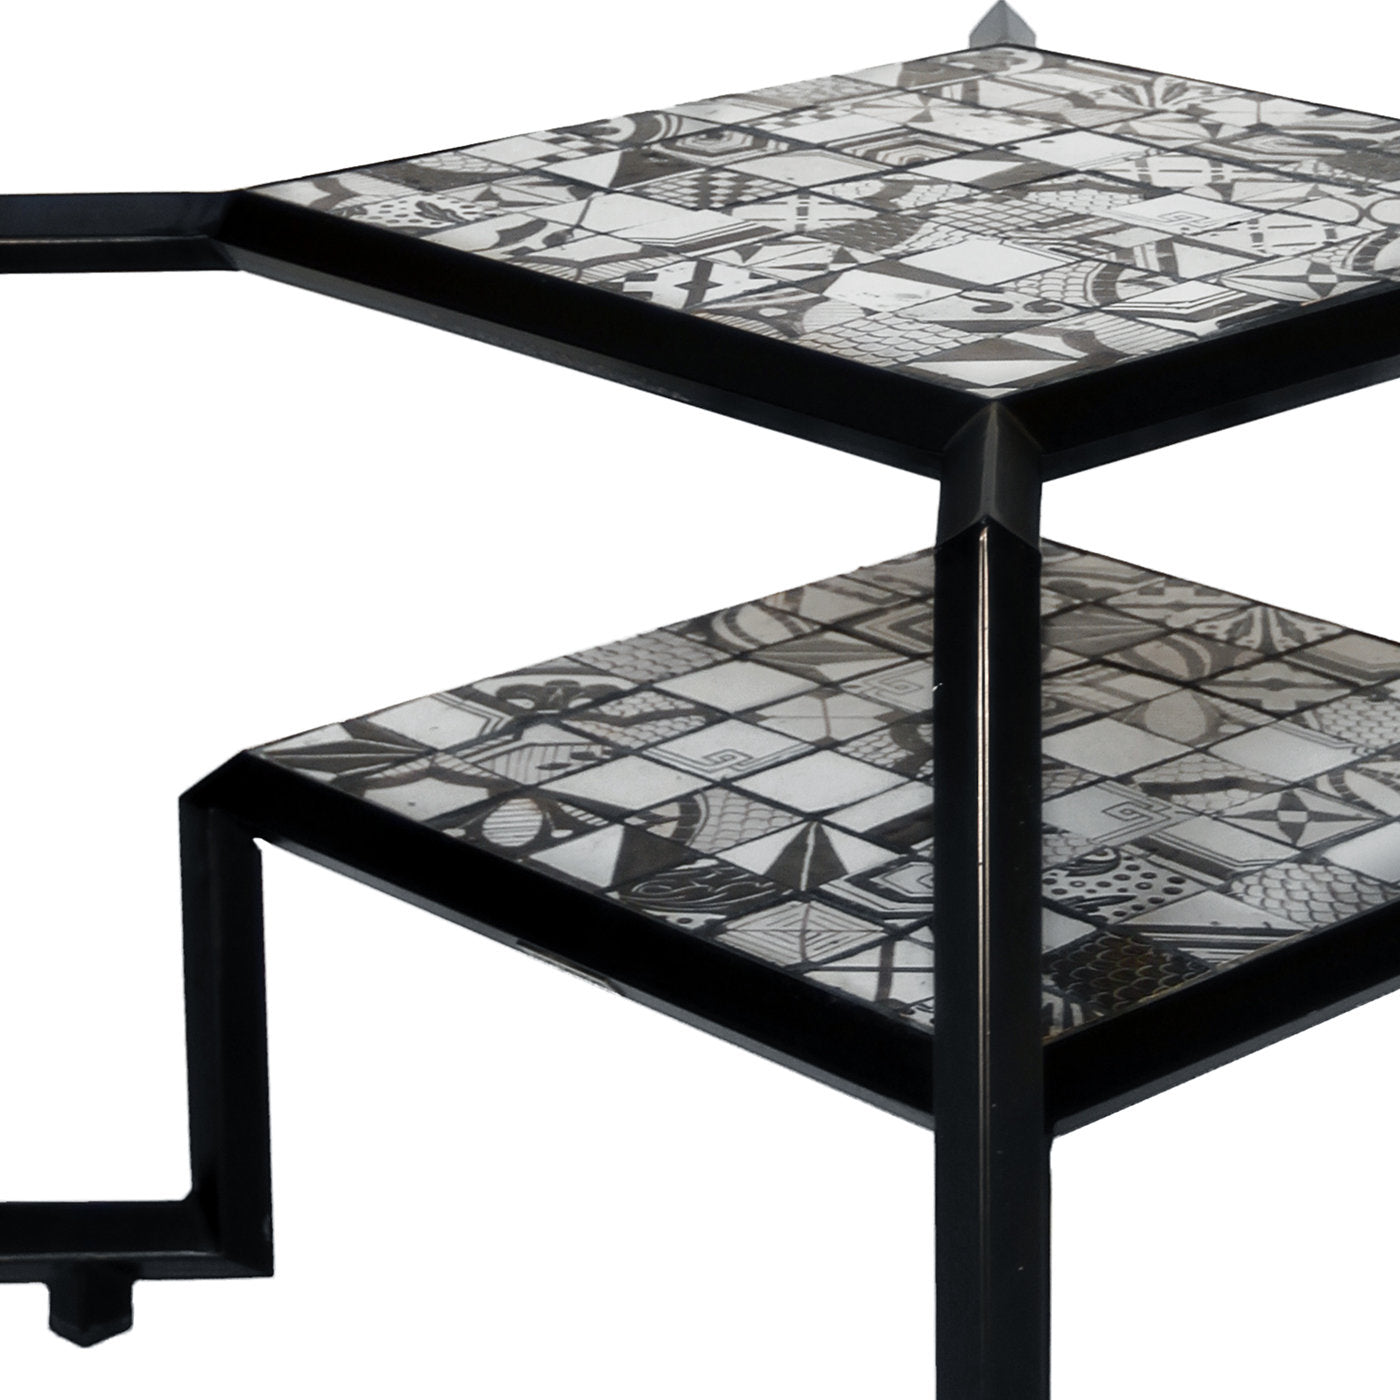 Black and White Spider Mosaic Tile Table - Alternative view 1